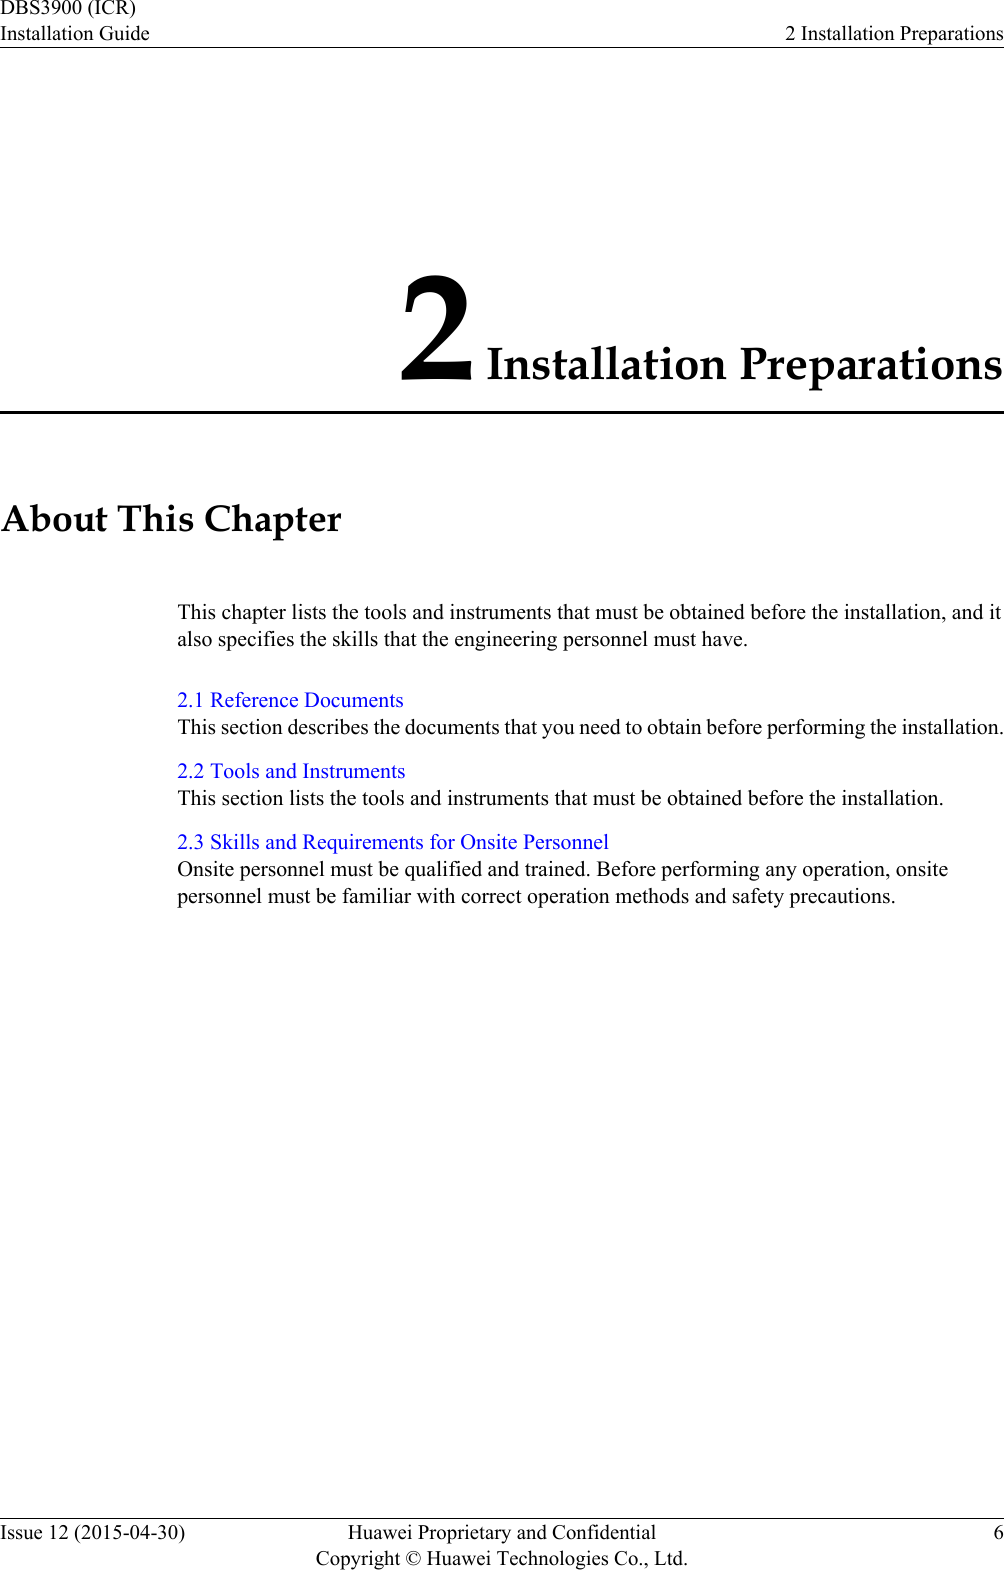 2 Installation PreparationsAbout This ChapterThis chapter lists the tools and instruments that must be obtained before the installation, and italso specifies the skills that the engineering personnel must have.2.1 Reference DocumentsThis section describes the documents that you need to obtain before performing the installation.2.2 Tools and InstrumentsThis section lists the tools and instruments that must be obtained before the installation.2.3 Skills and Requirements for Onsite PersonnelOnsite personnel must be qualified and trained. Before performing any operation, onsitepersonnel must be familiar with correct operation methods and safety precautions.DBS3900 (ICR)Installation Guide 2 Installation PreparationsIssue 12 (2015-04-30) Huawei Proprietary and ConfidentialCopyright © Huawei Technologies Co., Ltd.6